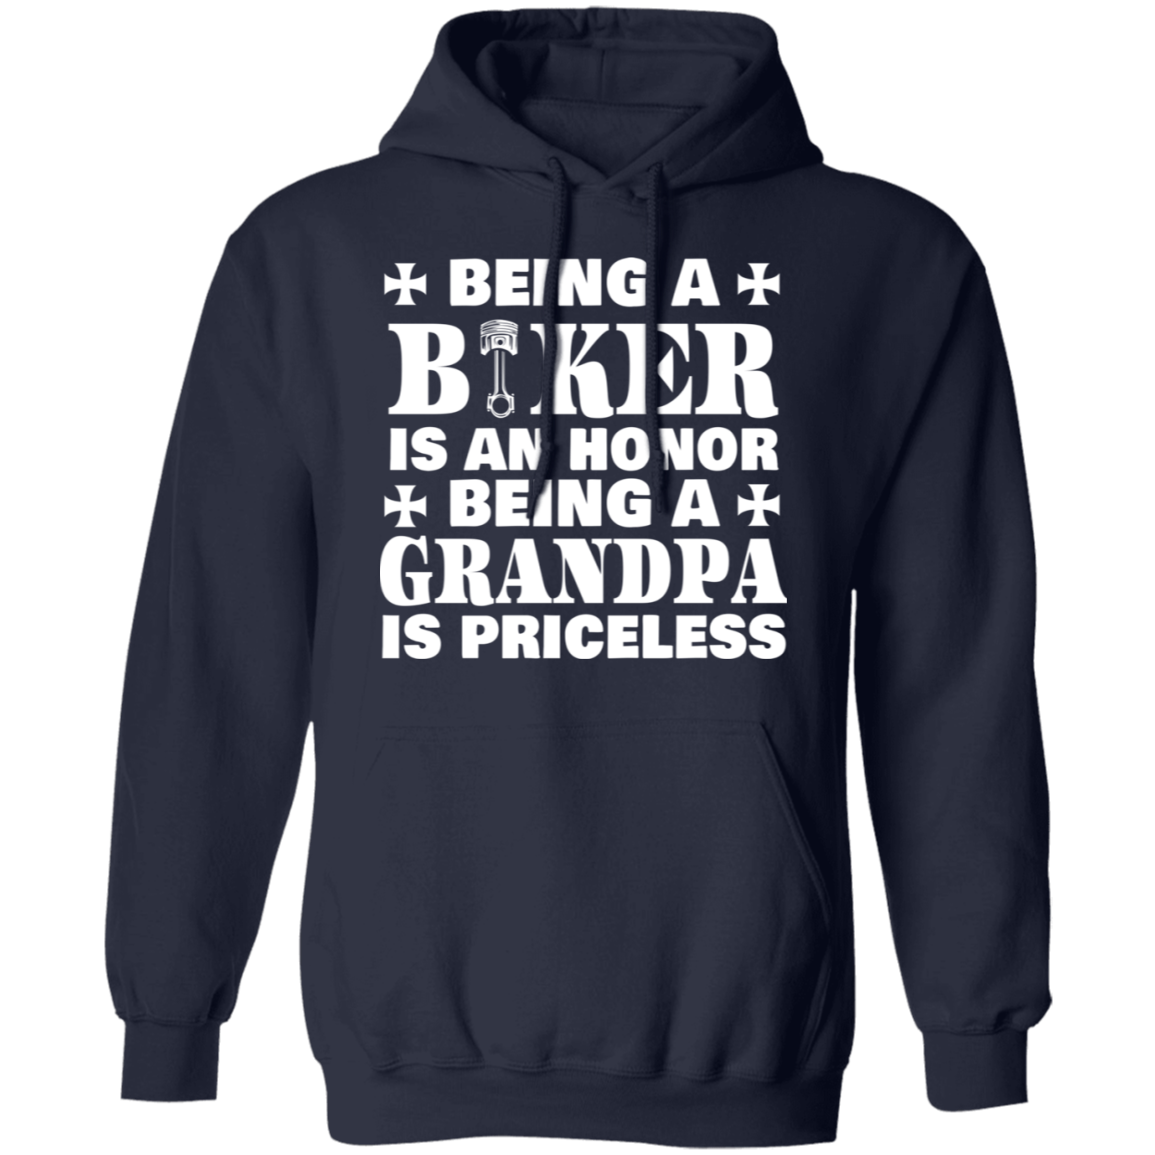 Being a grandpa is priceless Shirt